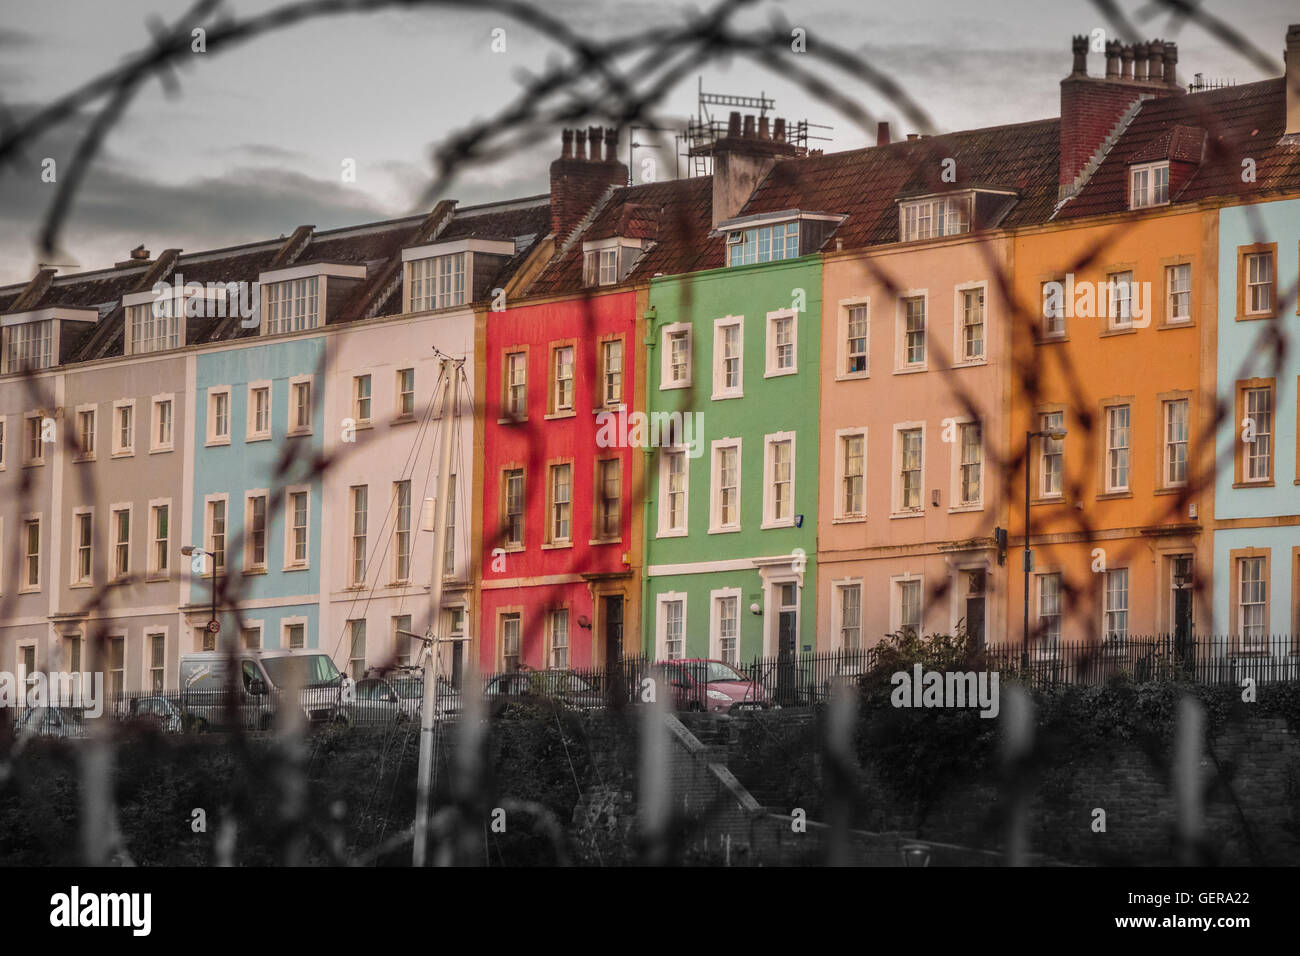 Colorful homes behind barbed wire in Bristol harbour, England, UK Stock Photo